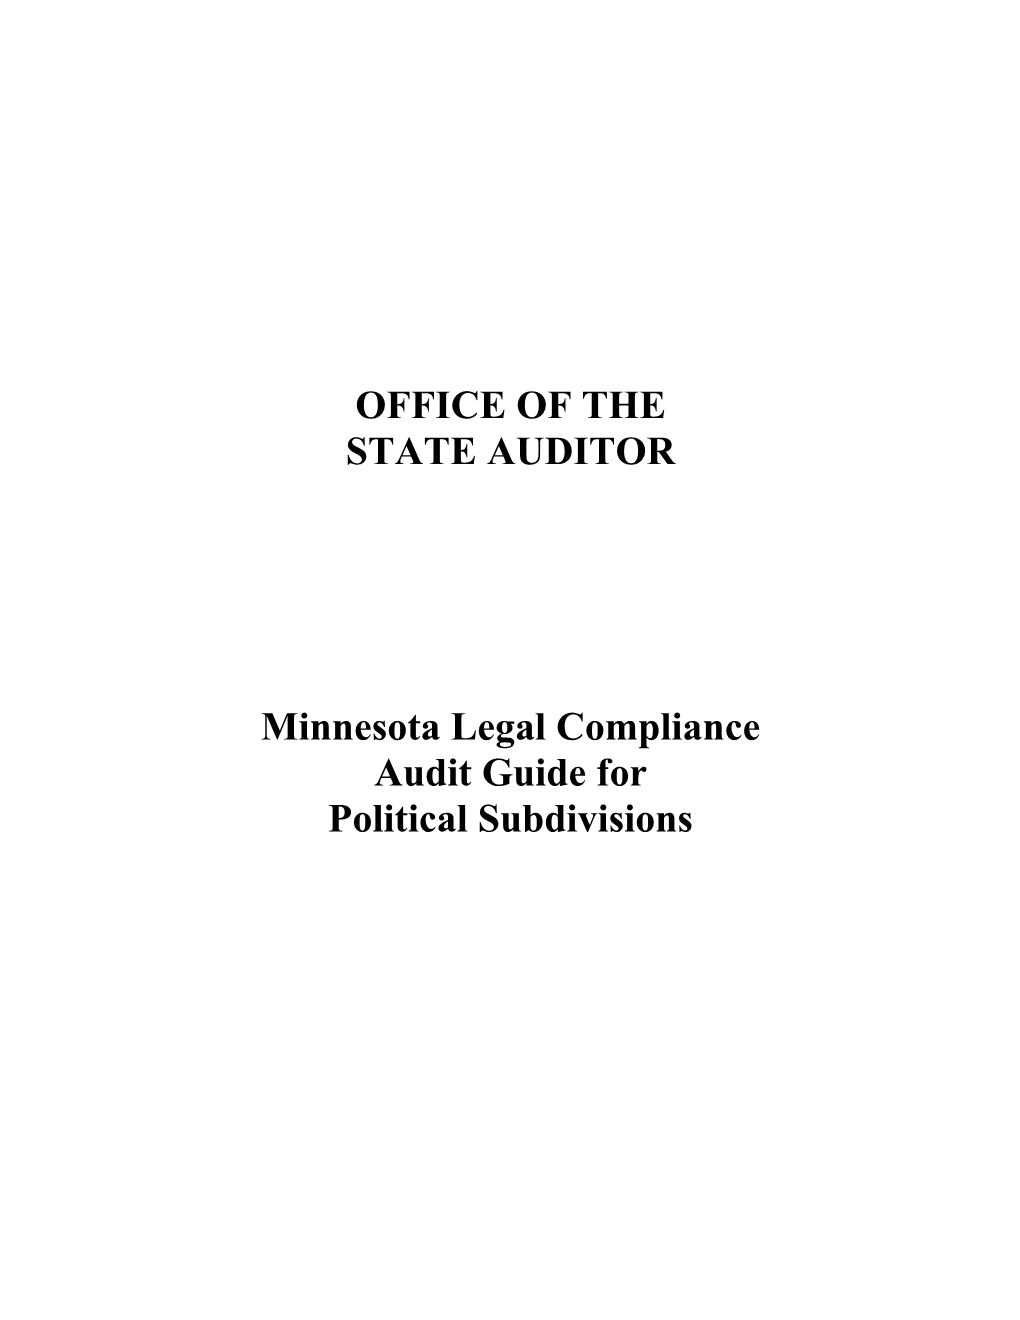 2009 Minnesota Legal Compliance Audit Guide for Local Governments Introduction s1